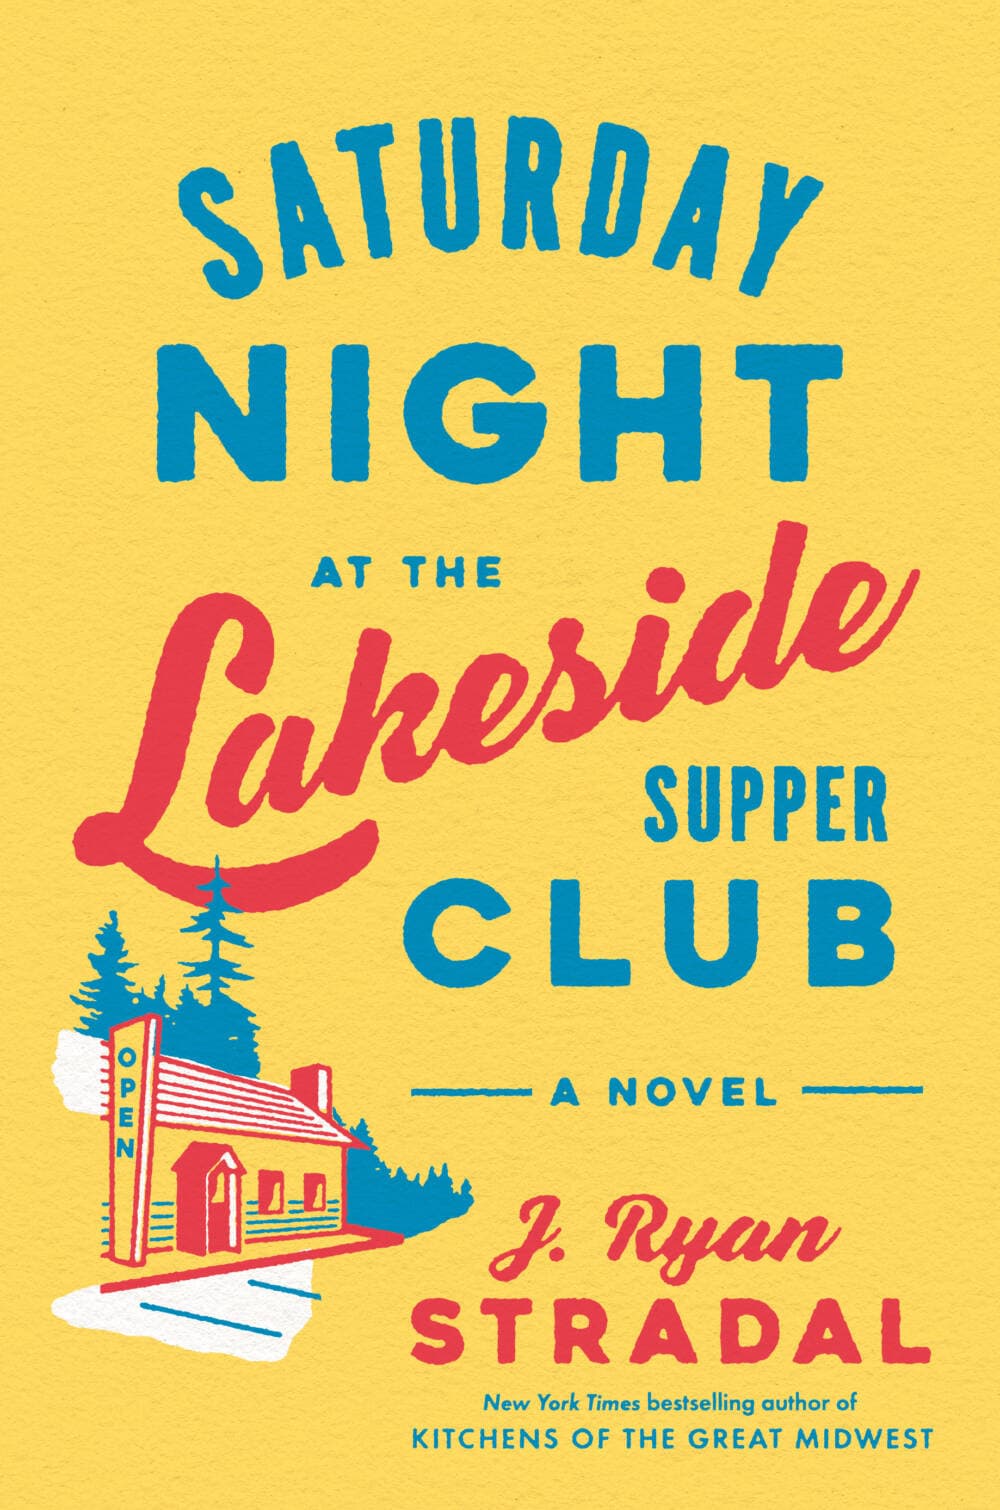 The cover of "Saturday Night at the Lakeside Supper Club." (Courtesy)